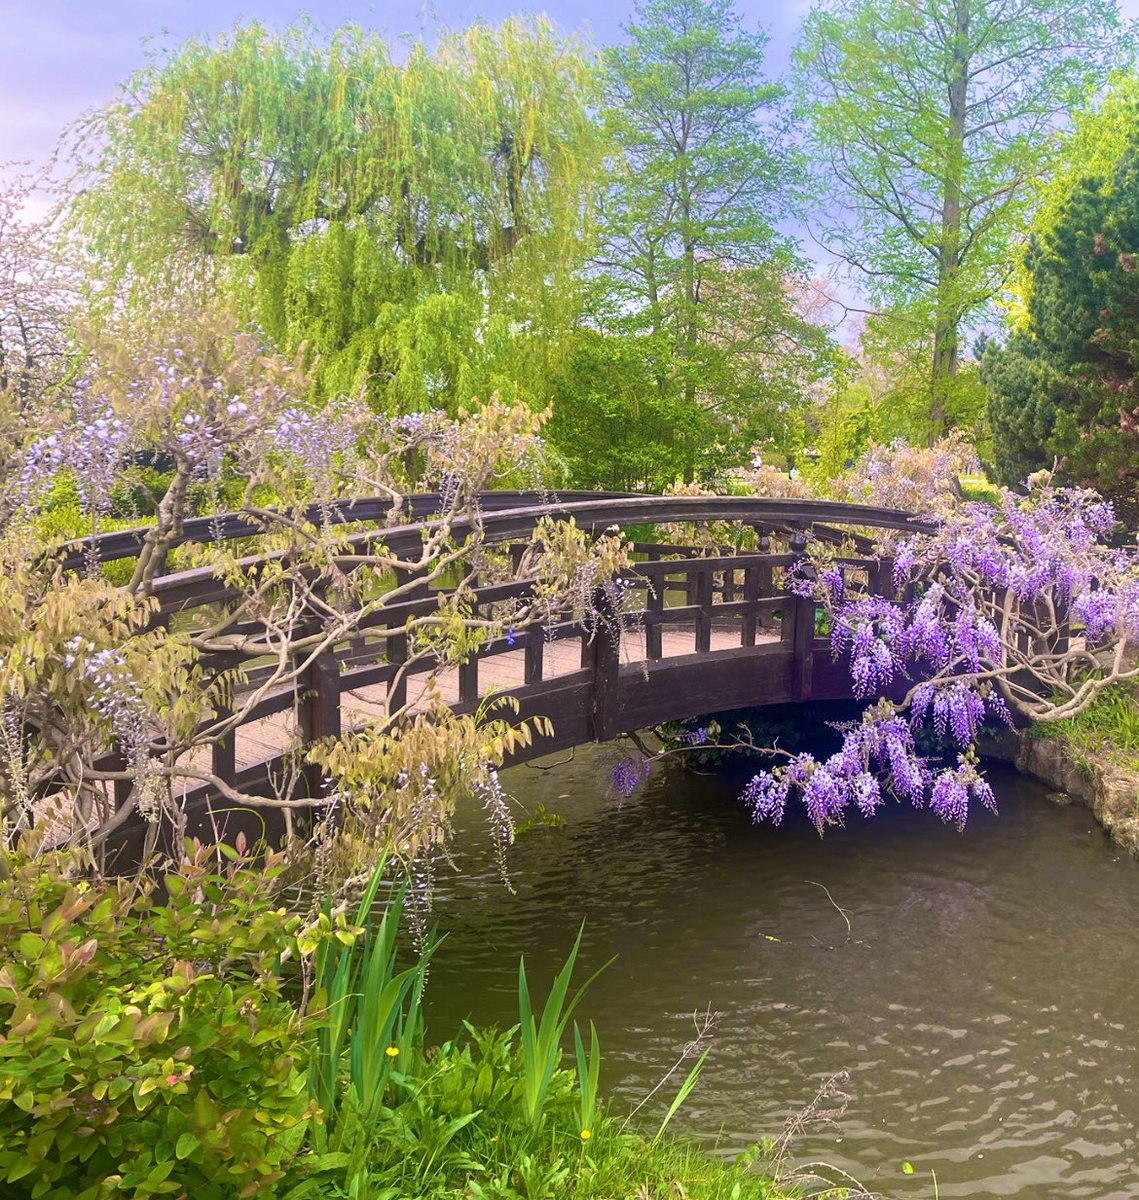 Made a pilgrimage to the wisteria bridge in Regent’s Park. One of my favourites.